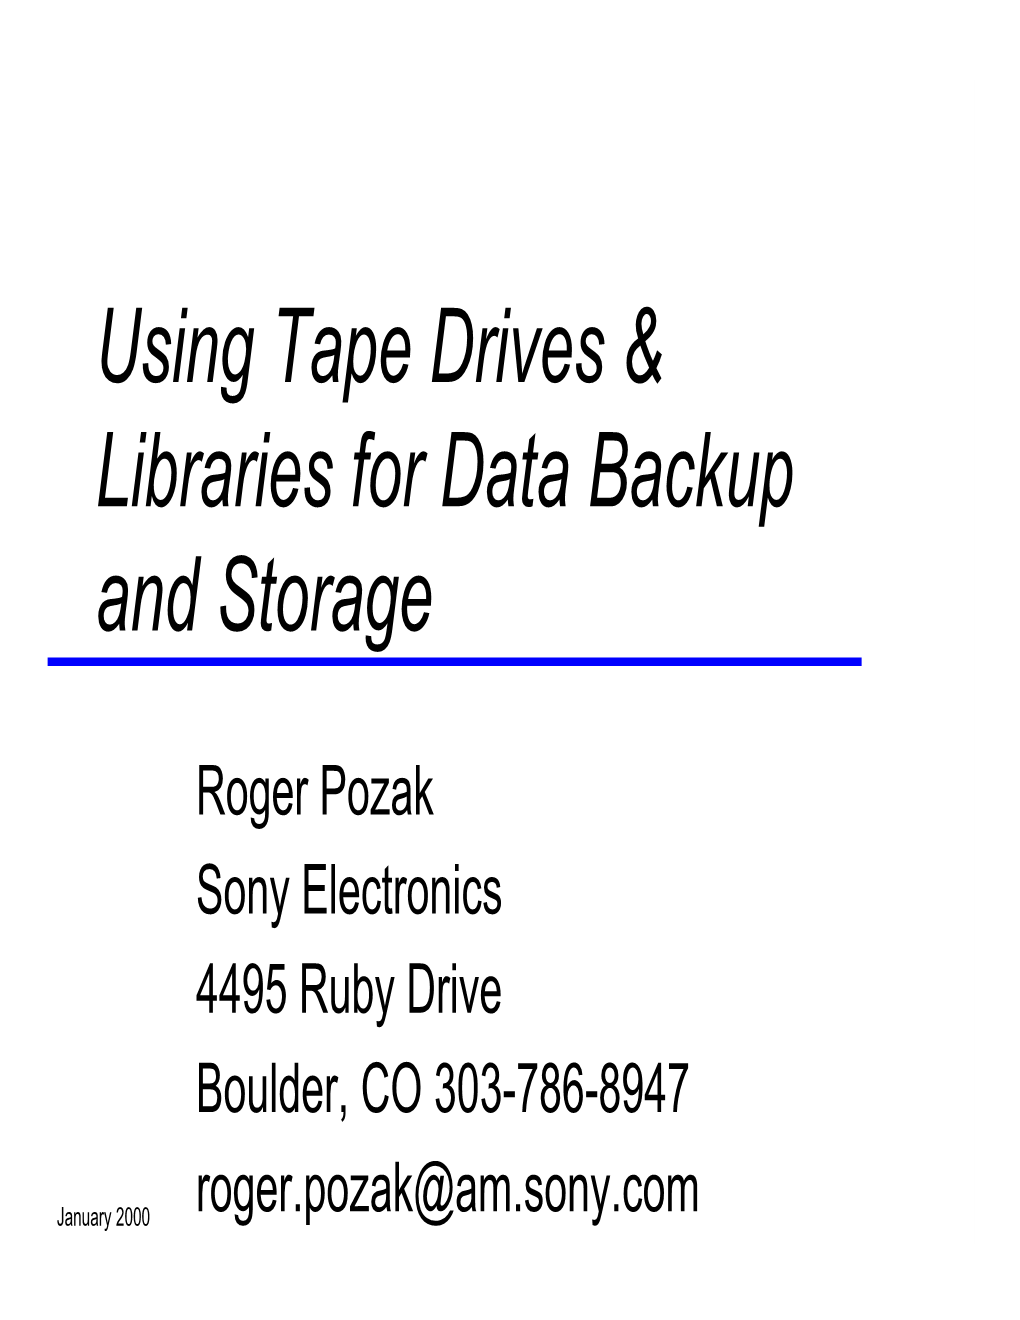 Using Tape Drives & Libraries for Data Backup and Storage